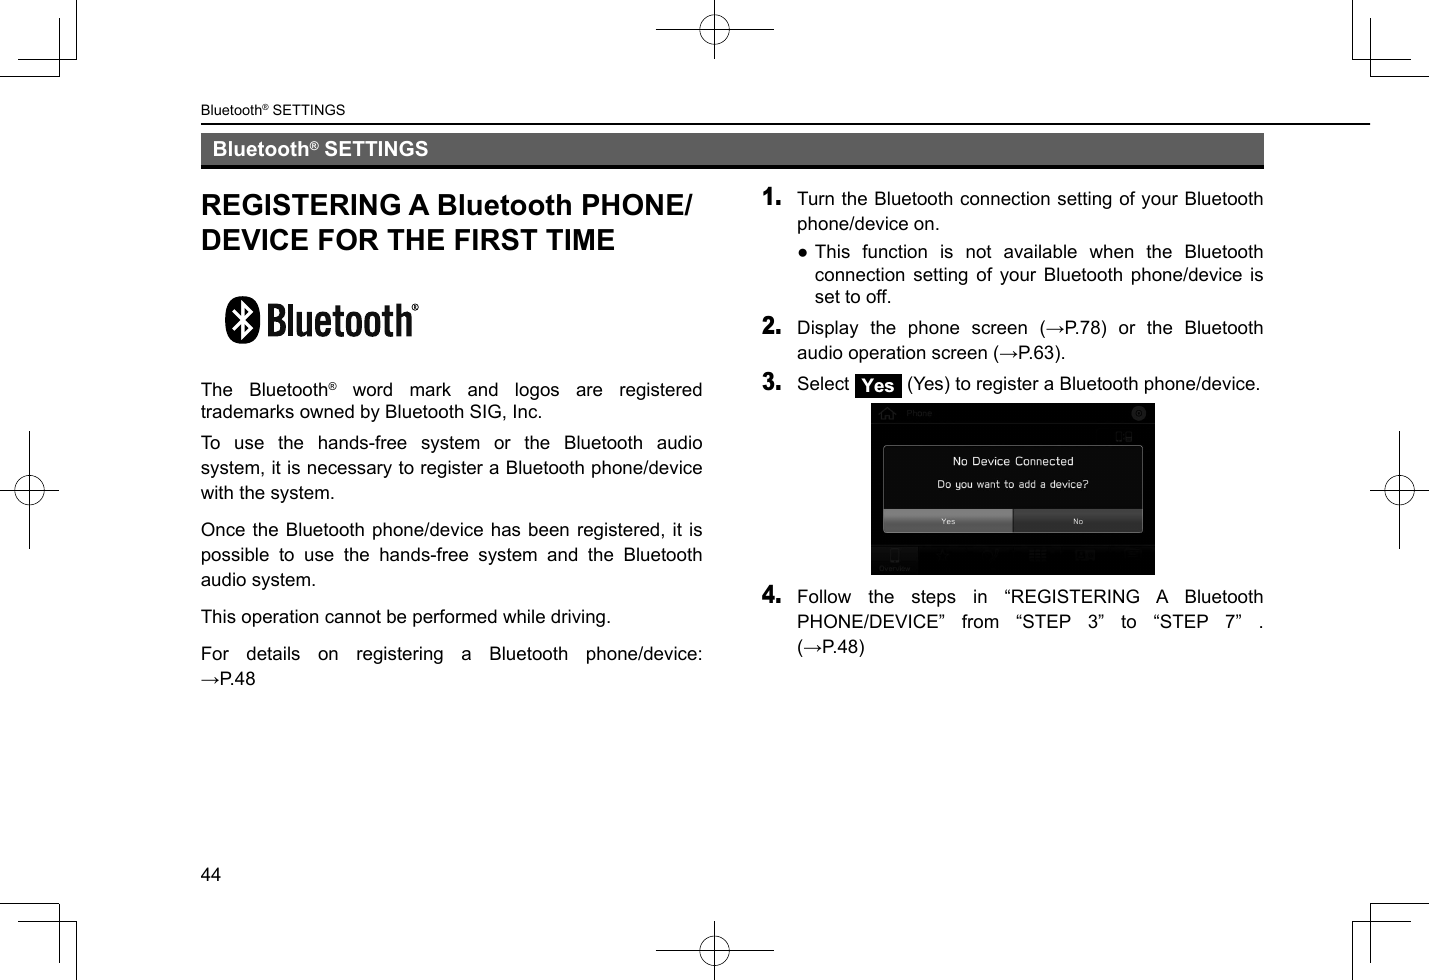 Bluetooth® SETTINGS44Bluetooth® SETTINGSREGISTERING A Bluetooth PHONE/DEVICE FOR THE FIRST TIMEThe Bluetooth® word mark and logos are registered trademarks owned by Bluetooth SIG, Inc.To use the hands-free system or the Bluetooth audio system, it is necessary to register a Bluetooth phone/device with the system.Once the Bluetooth phone/device has been registered, it is possible to use the hands-free system and the Bluetooth audio system.This operation cannot be performed while driving.For details on registering a Bluetooth phone/device: →P.481. Turn the Bluetooth connection setting of your Bluetooth phone/device on. ●This function is not available when the Bluetooth connection setting of your Bluetooth phone/device is set to off.2. Display  the  phone  screen  (→P.78)  or  the  Bluetooth audio operation screen (→P.63).3. Select Yes (Yes) to register a Bluetooth phone/device.4. Follow the steps in “REGISTERING A Bluetooth PHONE/DEVICE” from “STEP 3” to “STEP 7” . (→P.48)